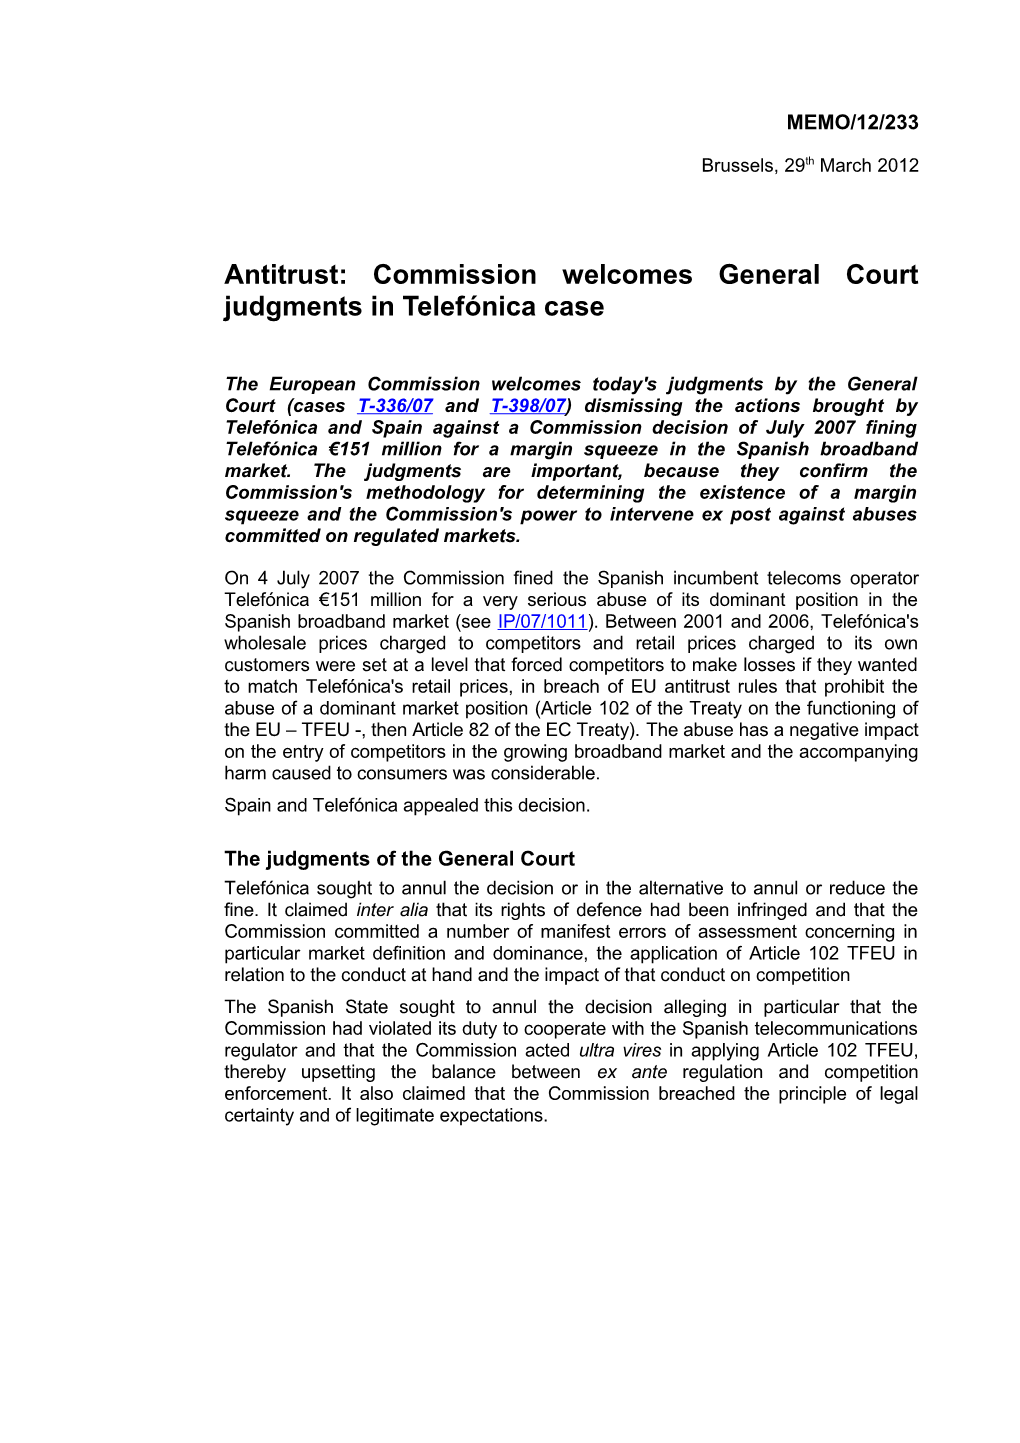 Antitrust: Commission Welcomes Generalcourt Judgments in Telefónica Case